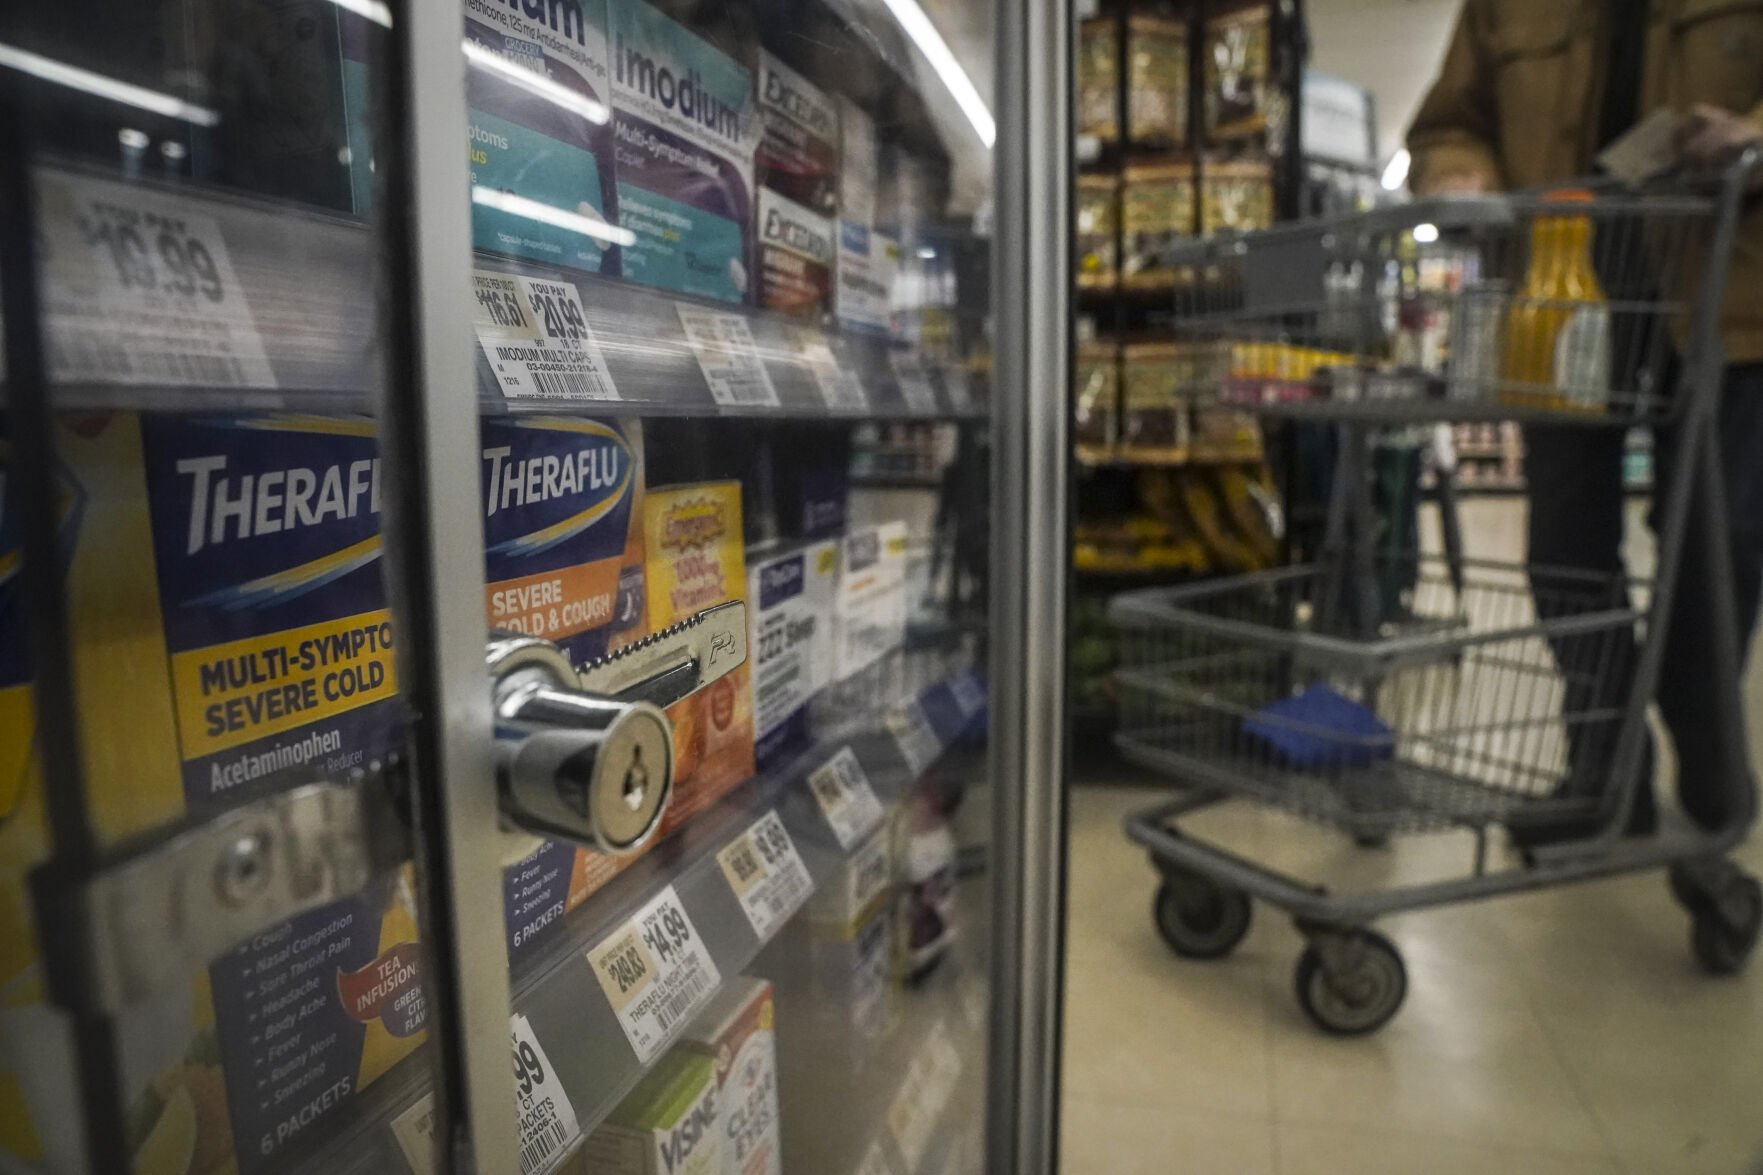 <p>Pharmaceutical items are kept locked in a glass cabinet at a Gristedes supermarket, Tuesday Jan. 31, 2023, in New York. Increasingly, retailers are locking up more products or increasing the number of security guards at their stores to curtail theft. (AP Photo/Bebeto Matthews)</p>   PHOTO CREDIT: Bebeto Matthews 